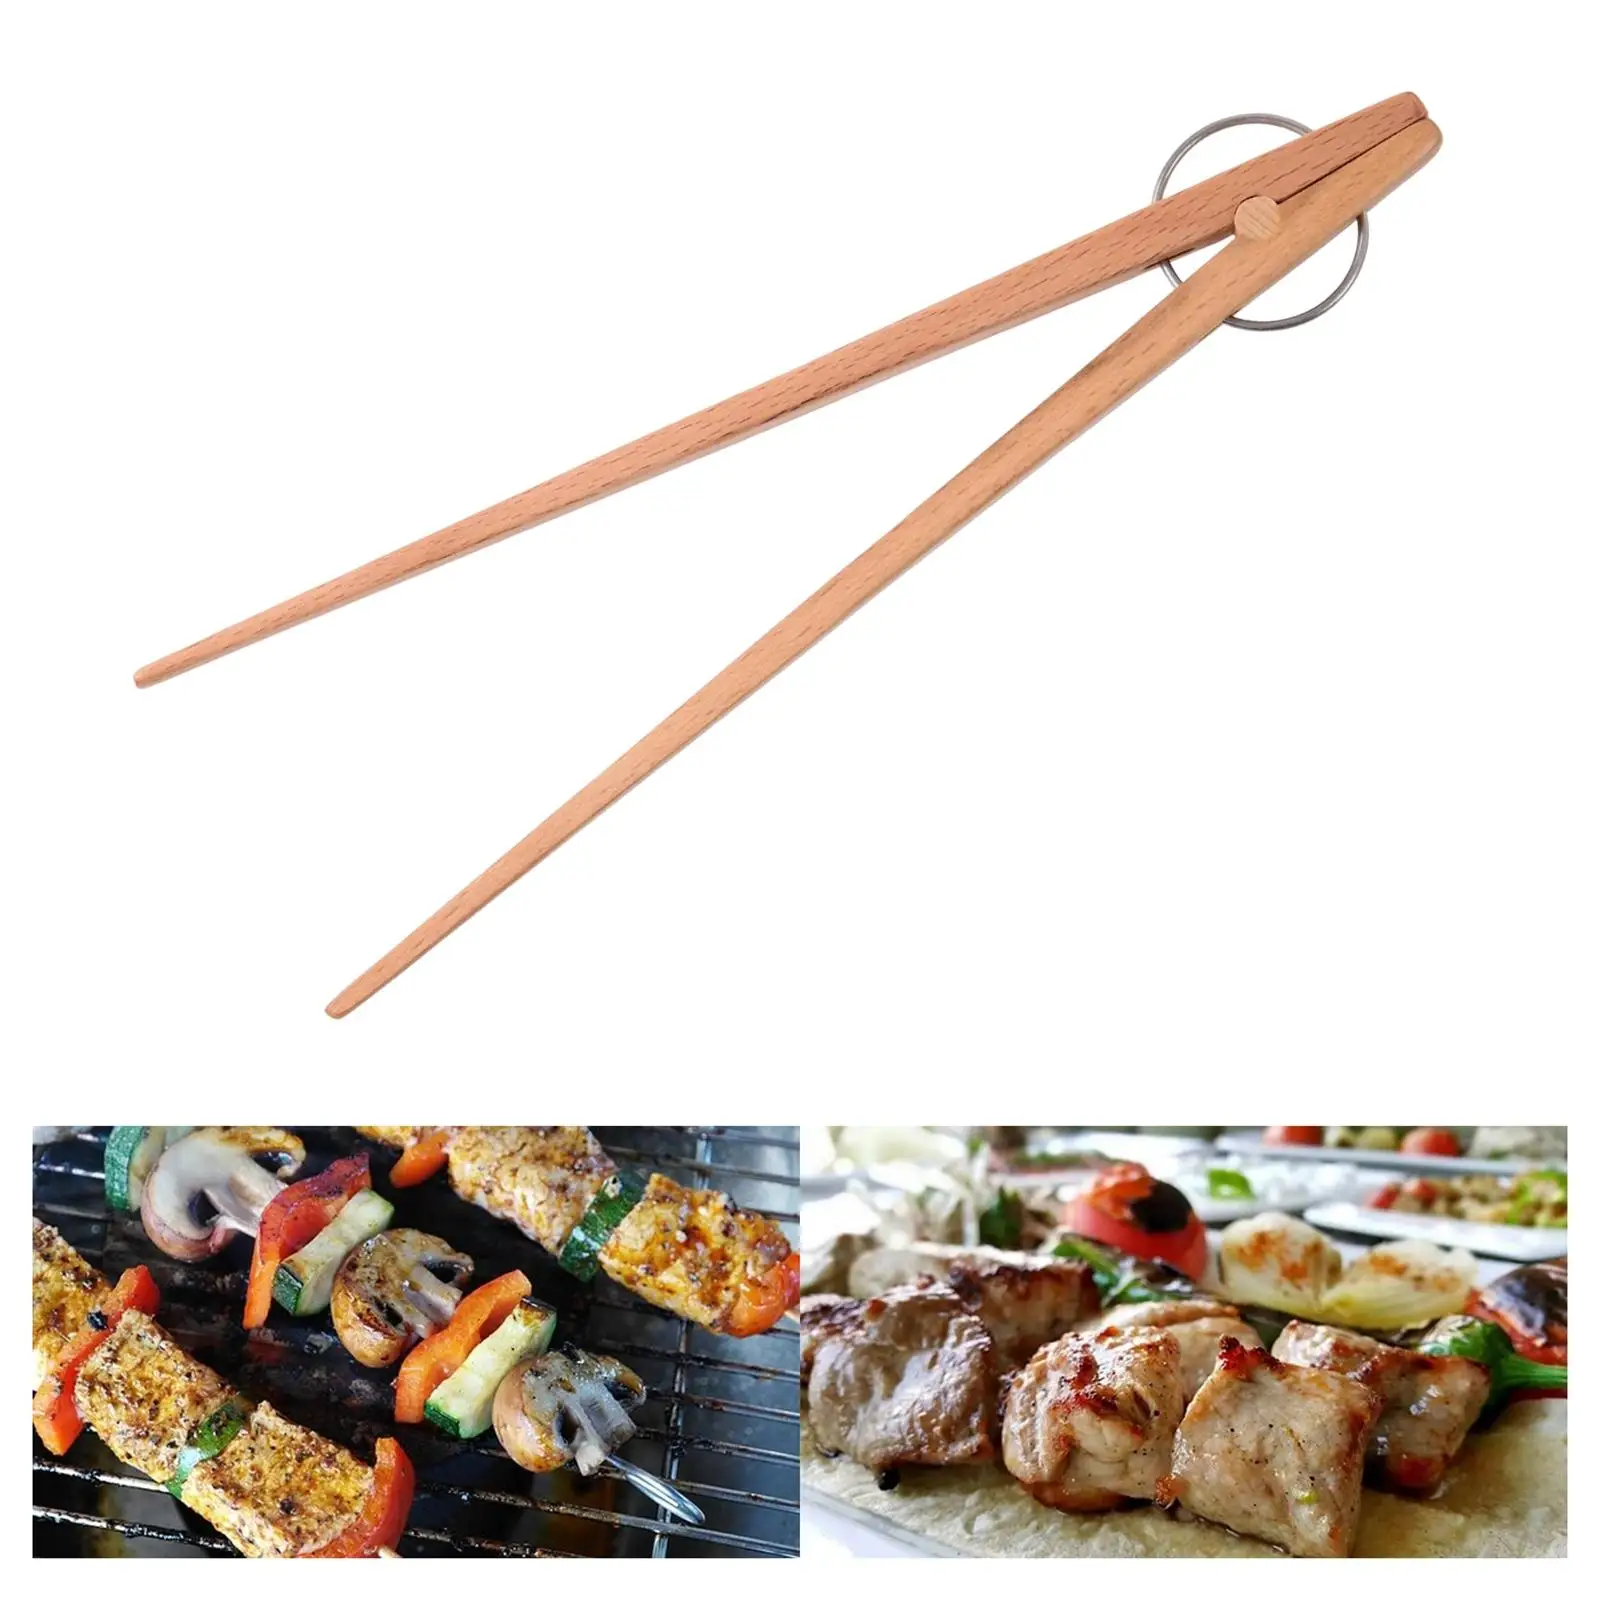 Wood Pastry Clamp Buffet Clip Kitchen Tools Utensils Bread Clip Kitchenware Food Clips for Home Barbecue Baking Picnic Party